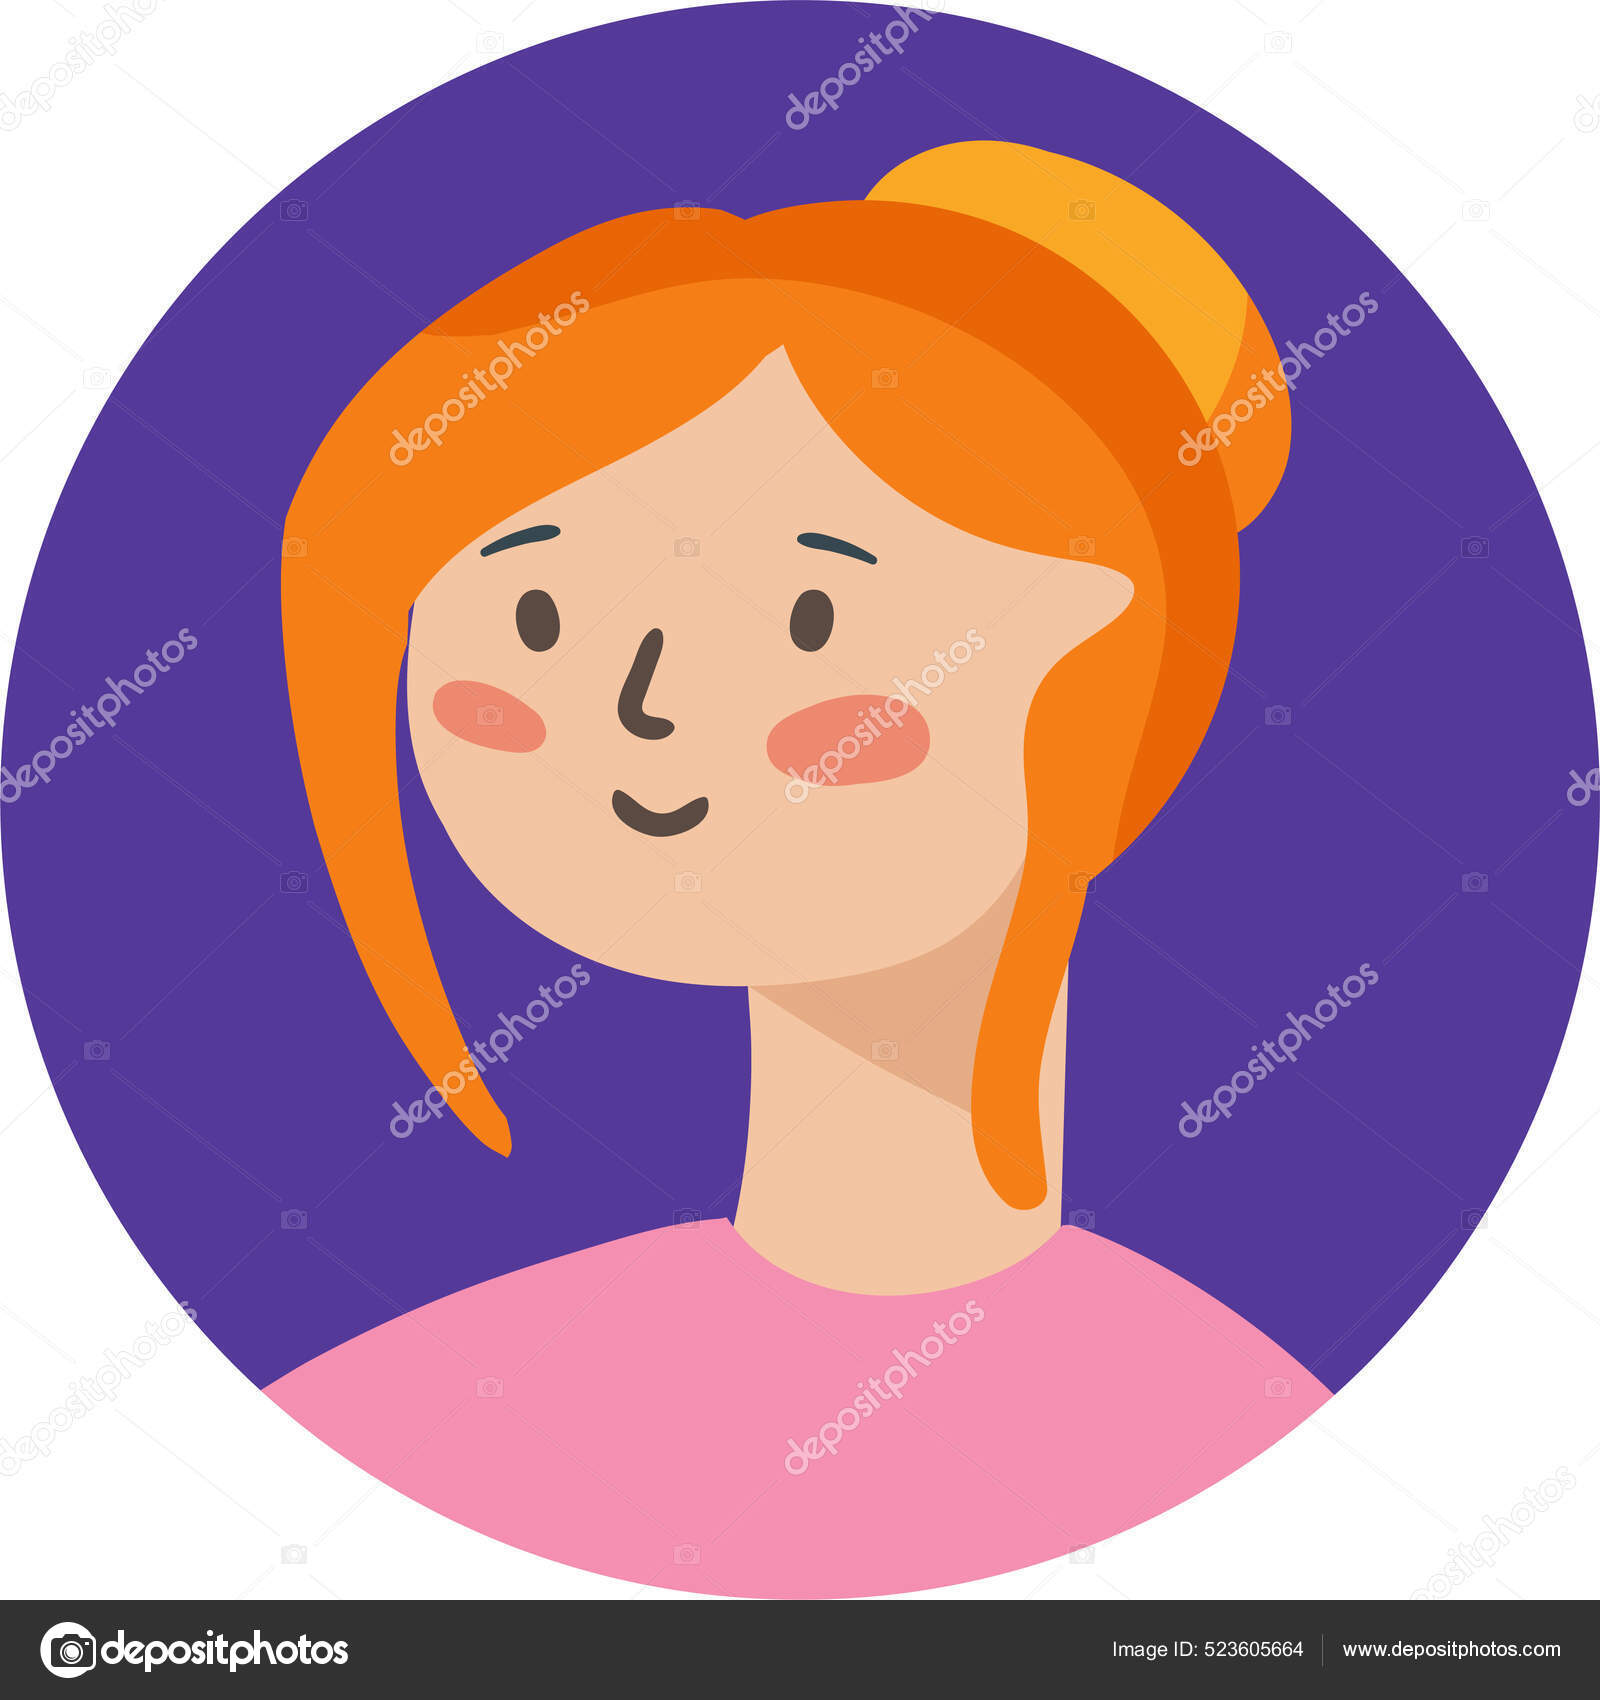 Avatar, people, business, woman, female, long hair icon - Download on  Iconfinder